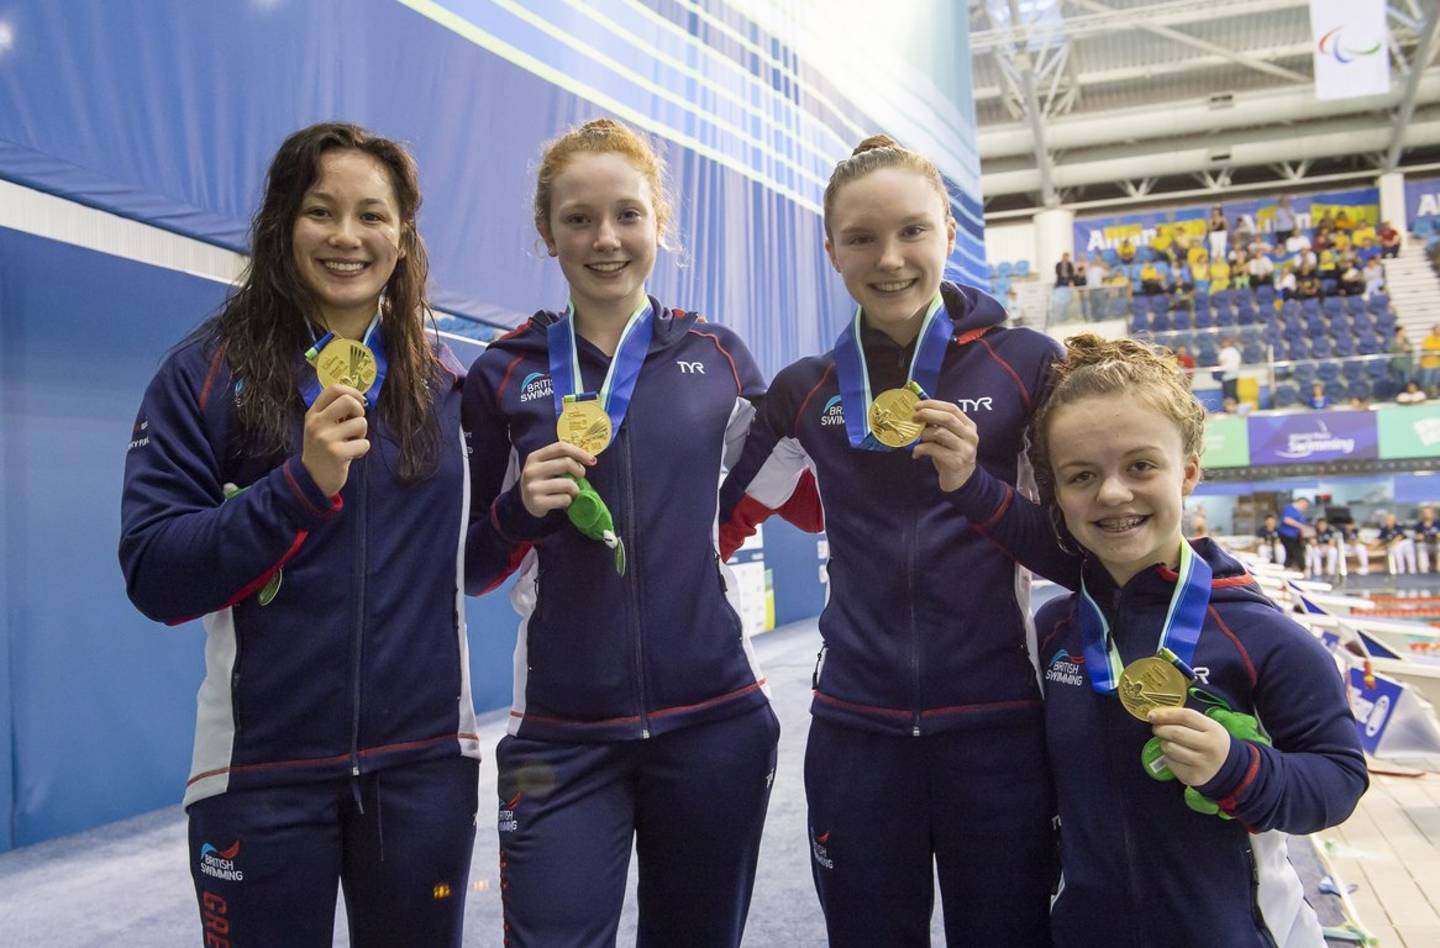 The women's relay team celebrate with their gold medal